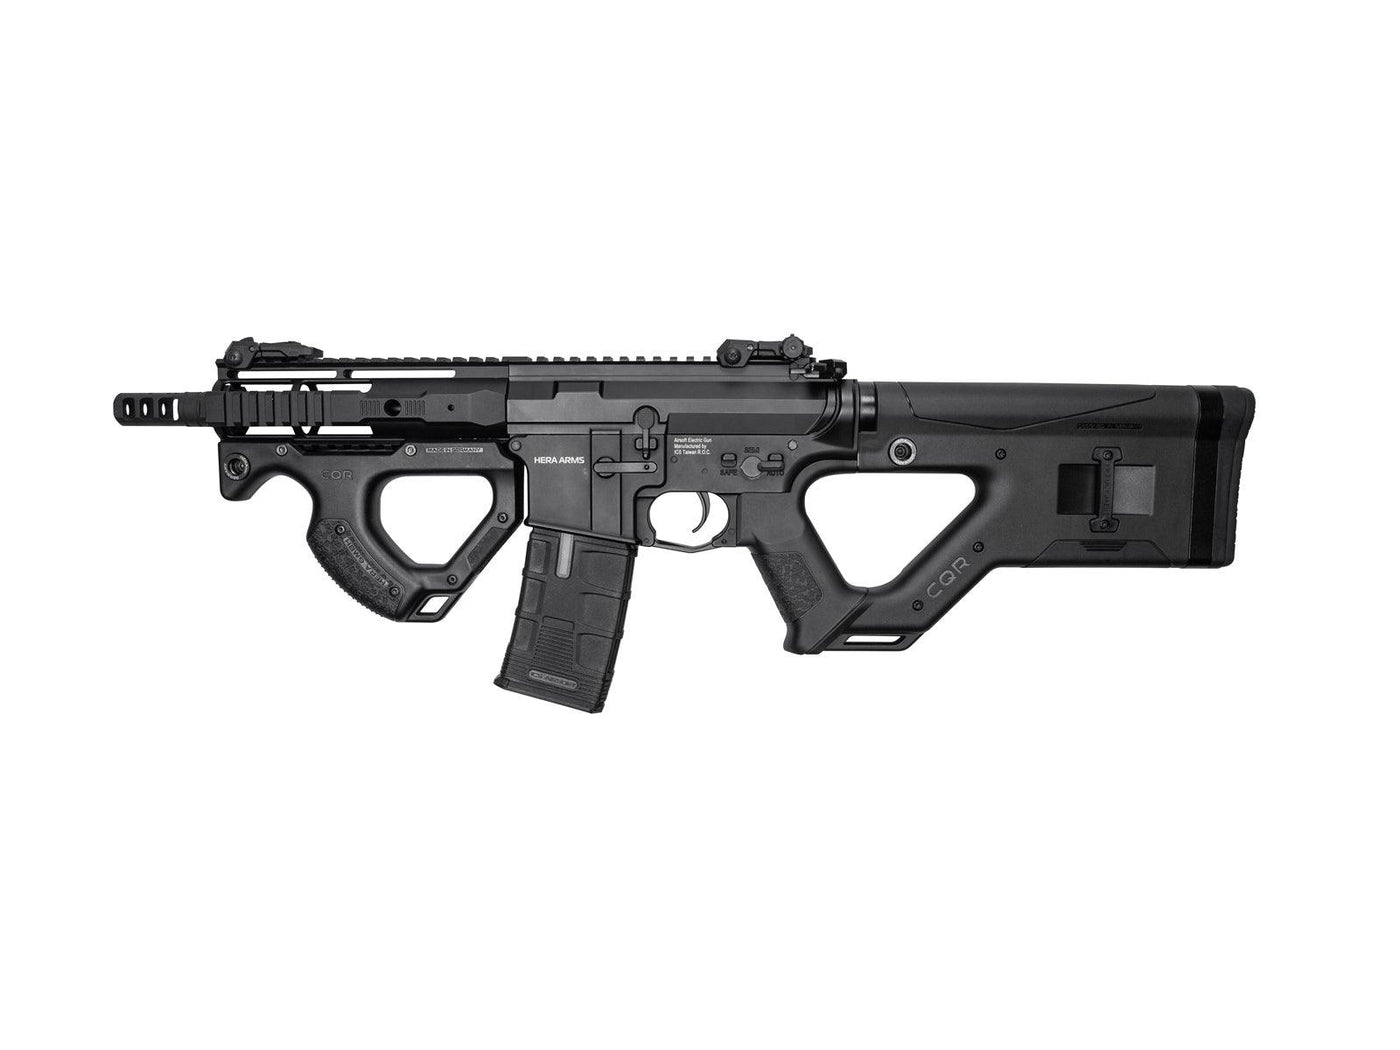 ASG Hera Arms Licensed CQR M4 Airsoft AEG by ICS (Model: Black w/ S3 Electronic Trigger) - Eminent Paintball And Airsoft